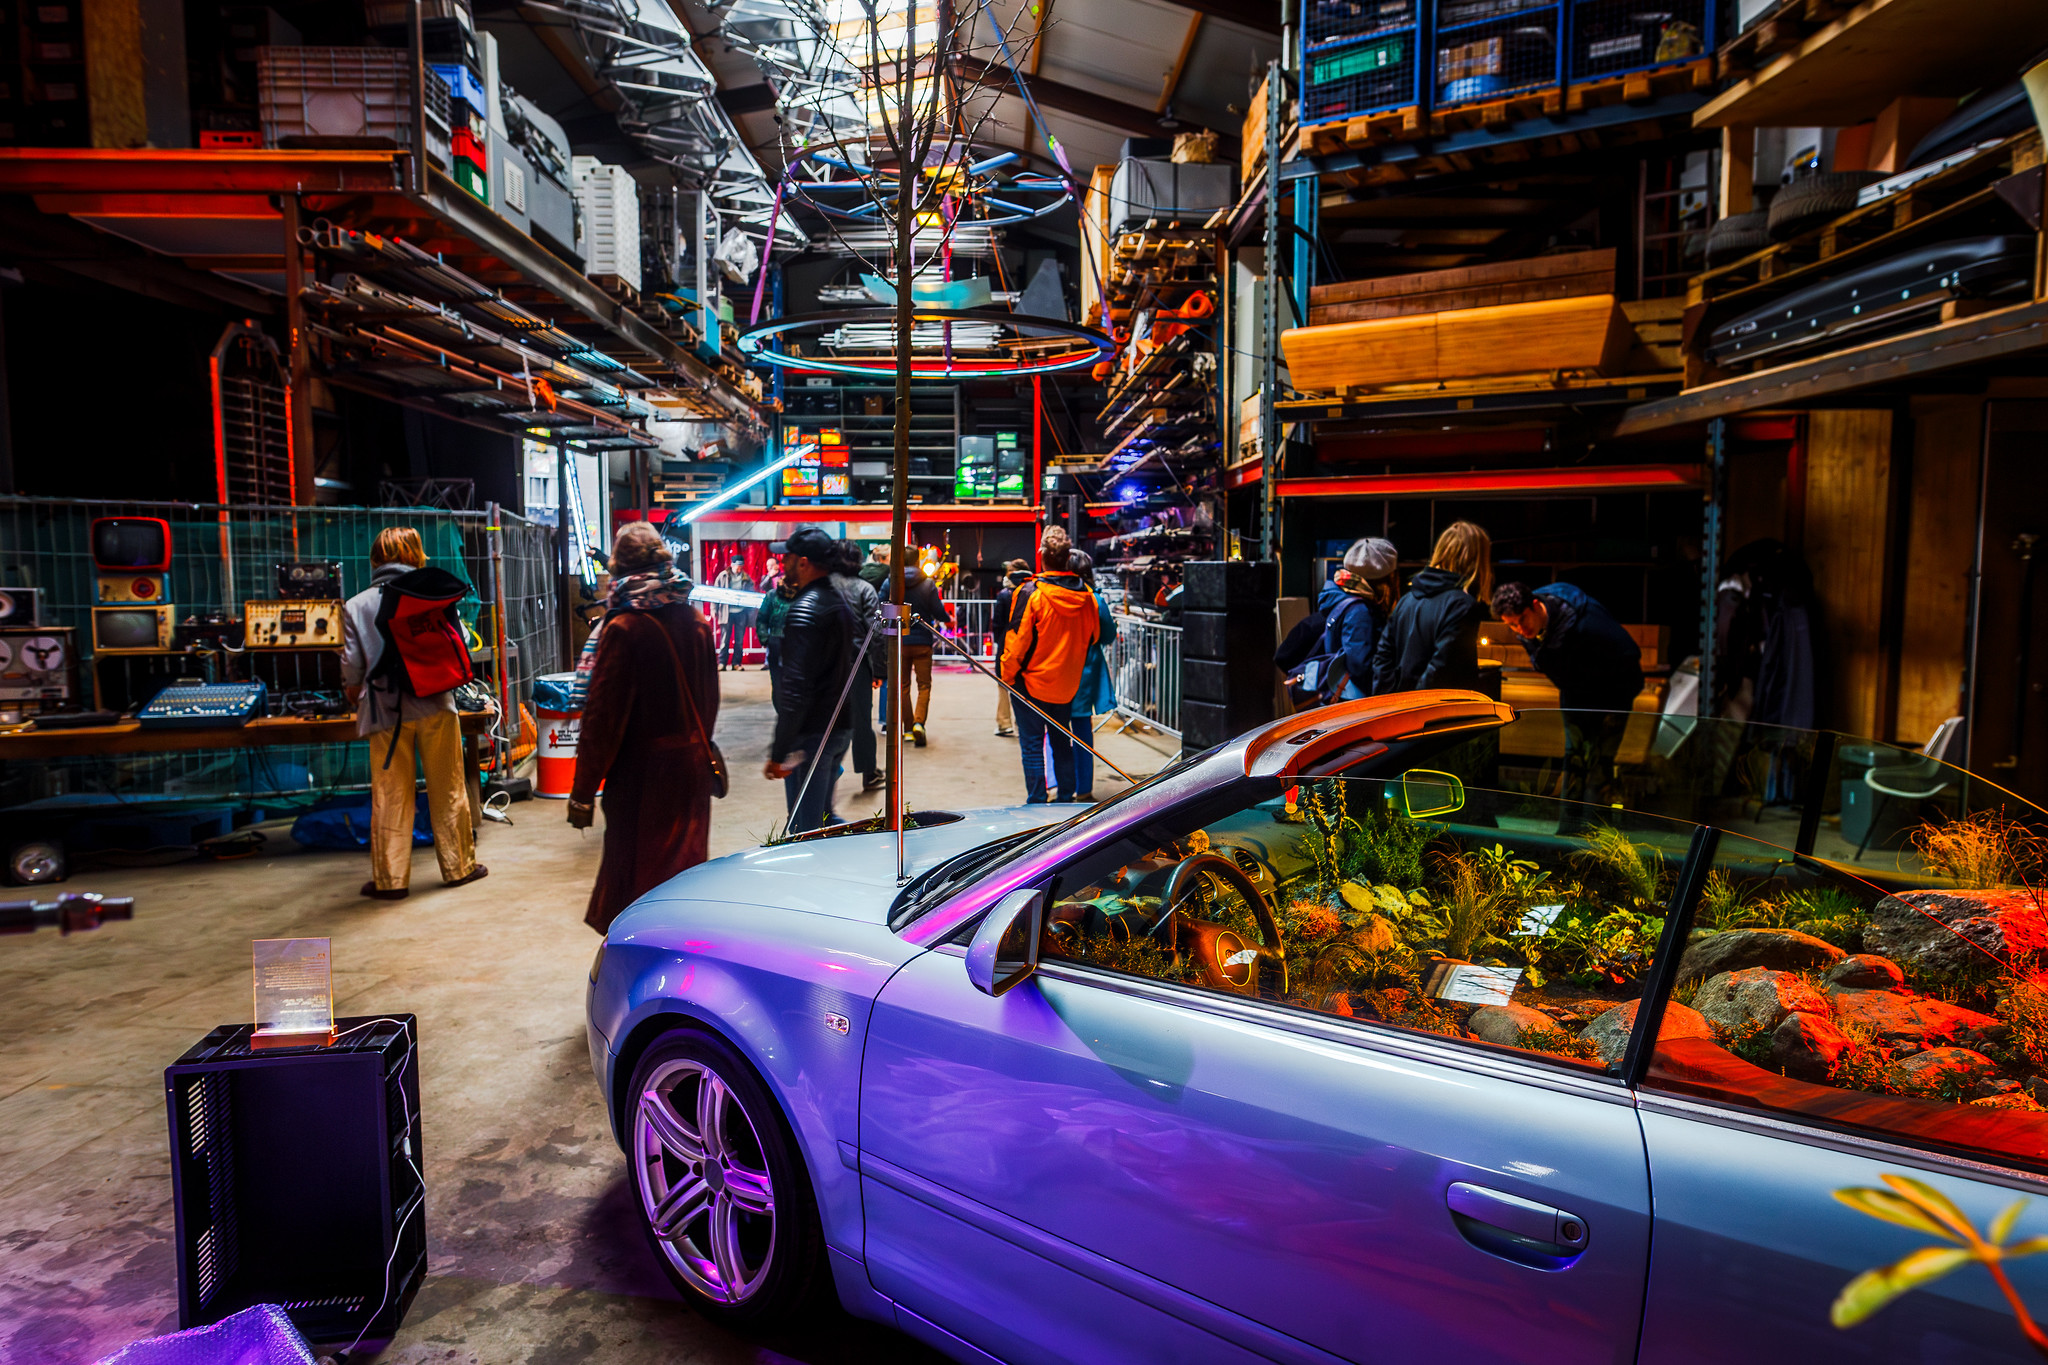 illuminated warehouse during an exposition with art installations. one of the installations in the front of the photo is convertible car filled with plants